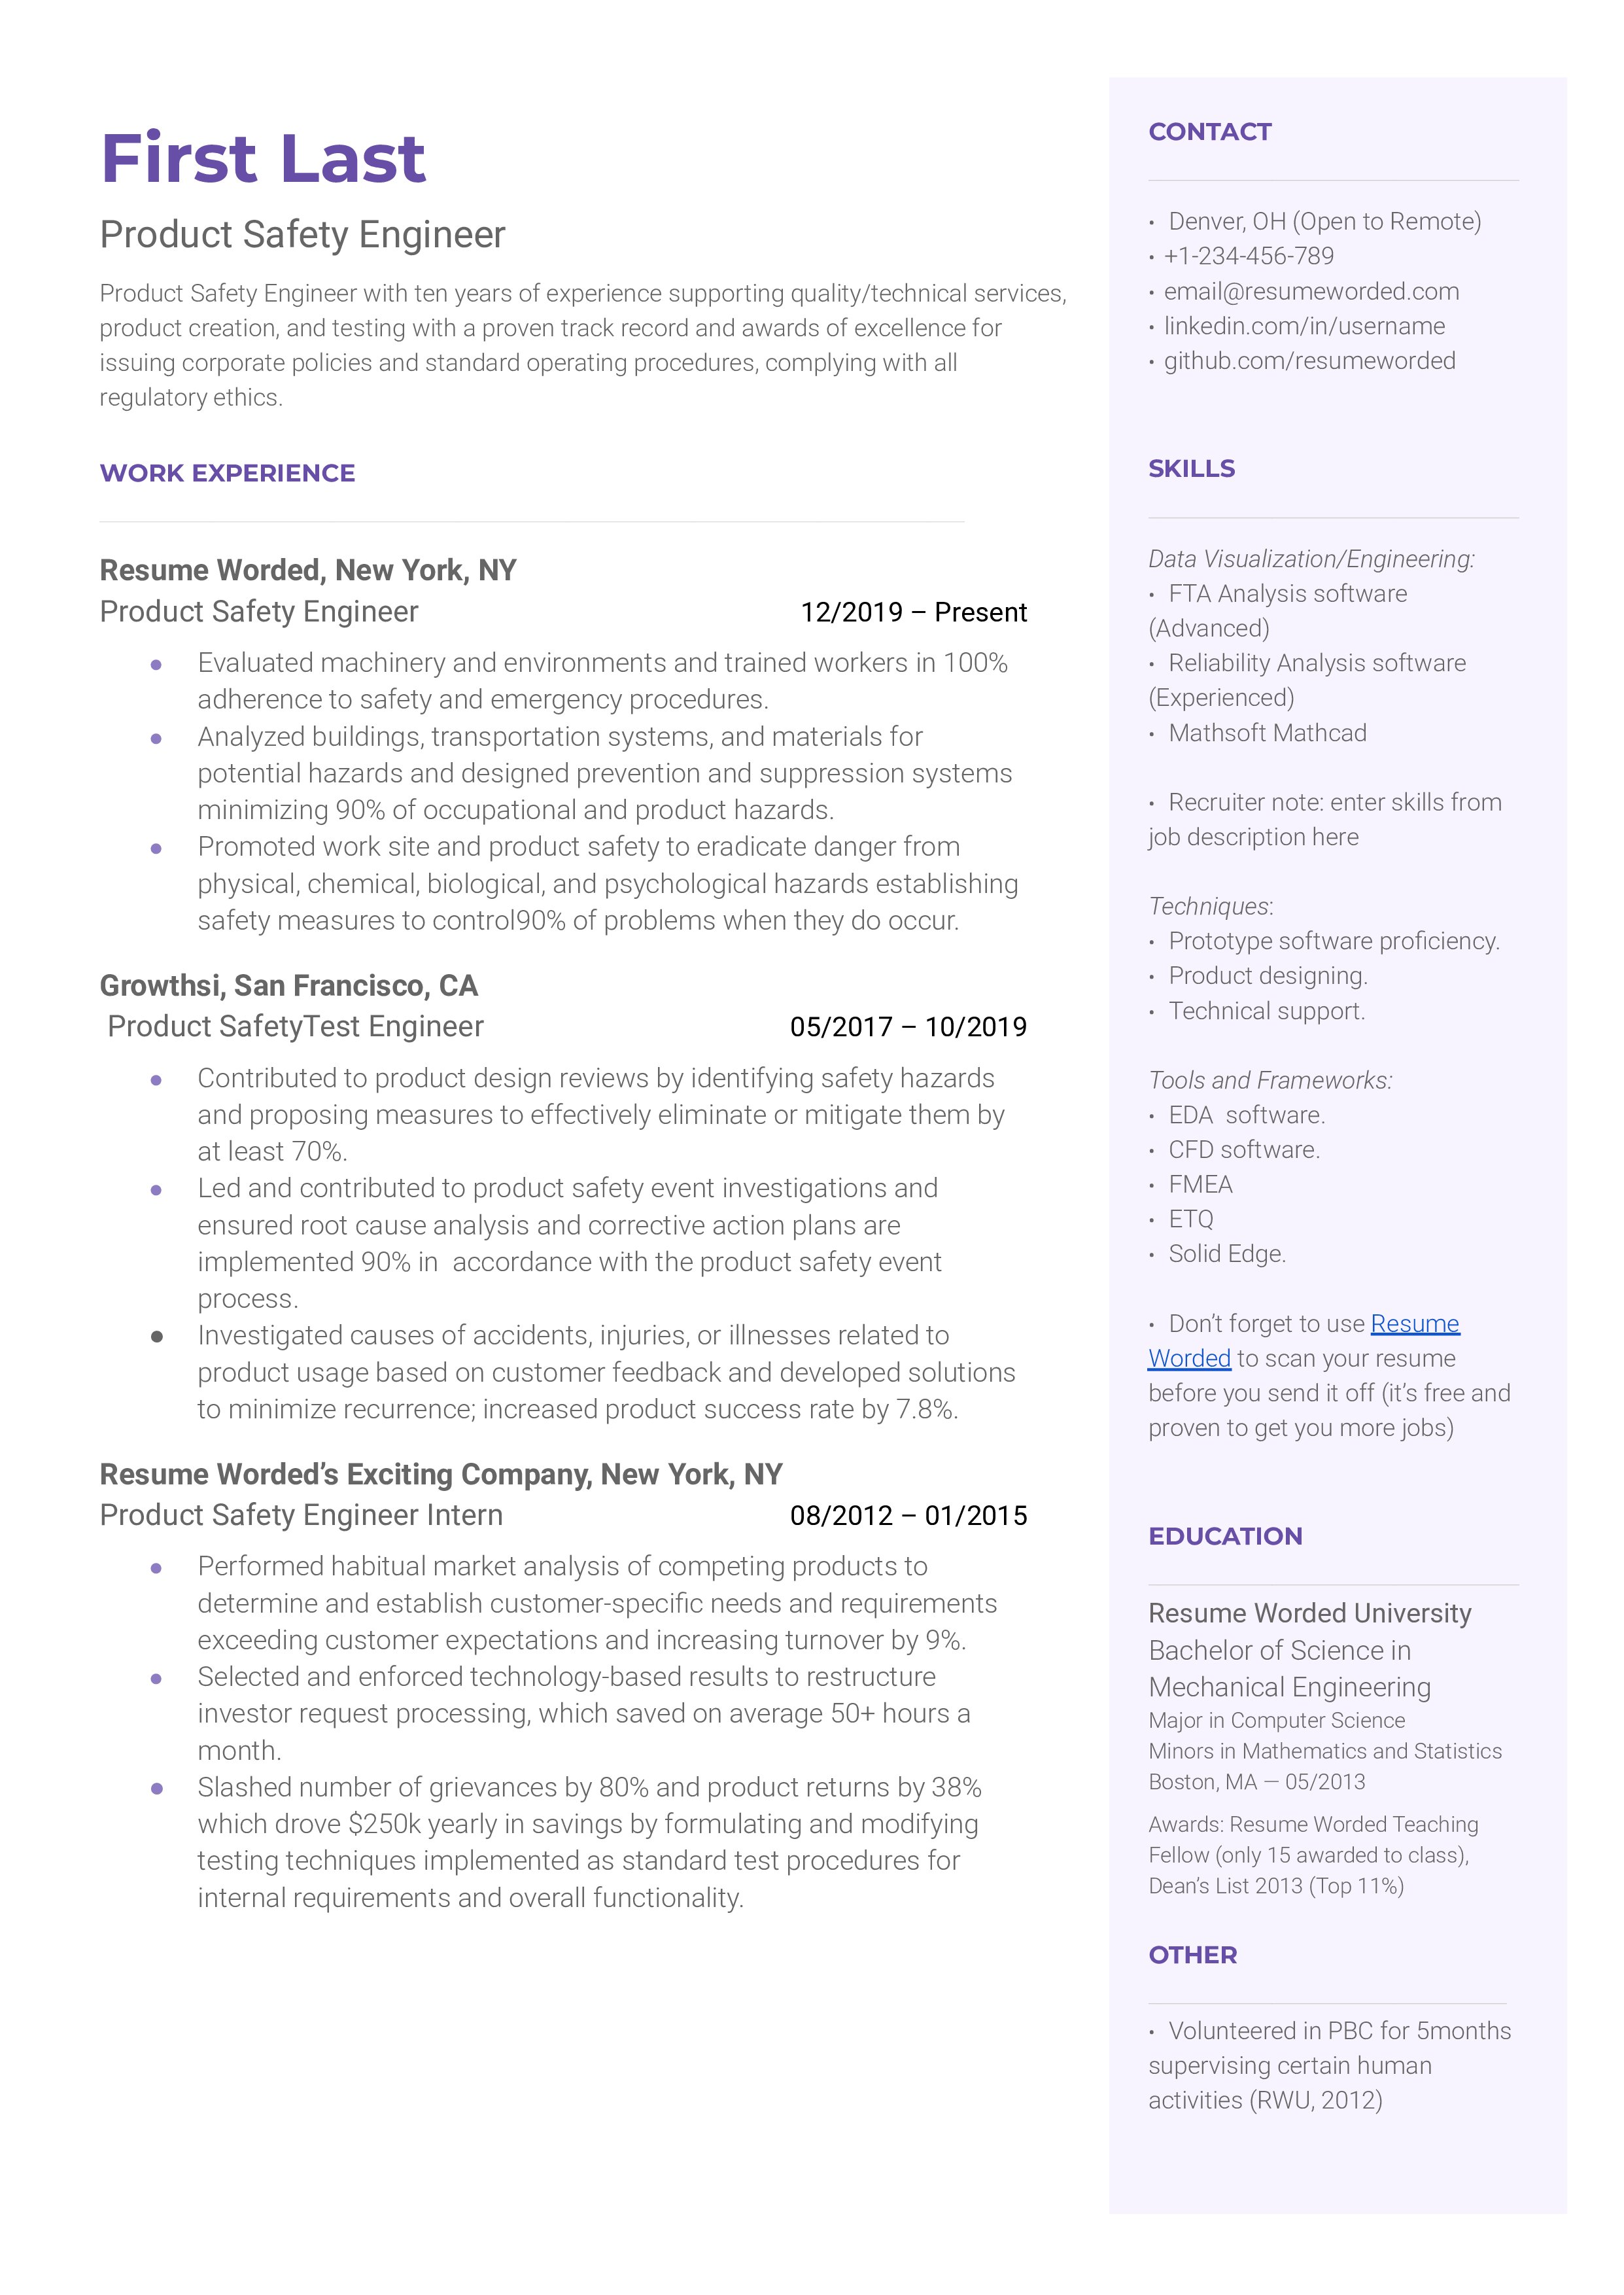 A product safety engineer resume template that organizes work history chronologically and with bullet points